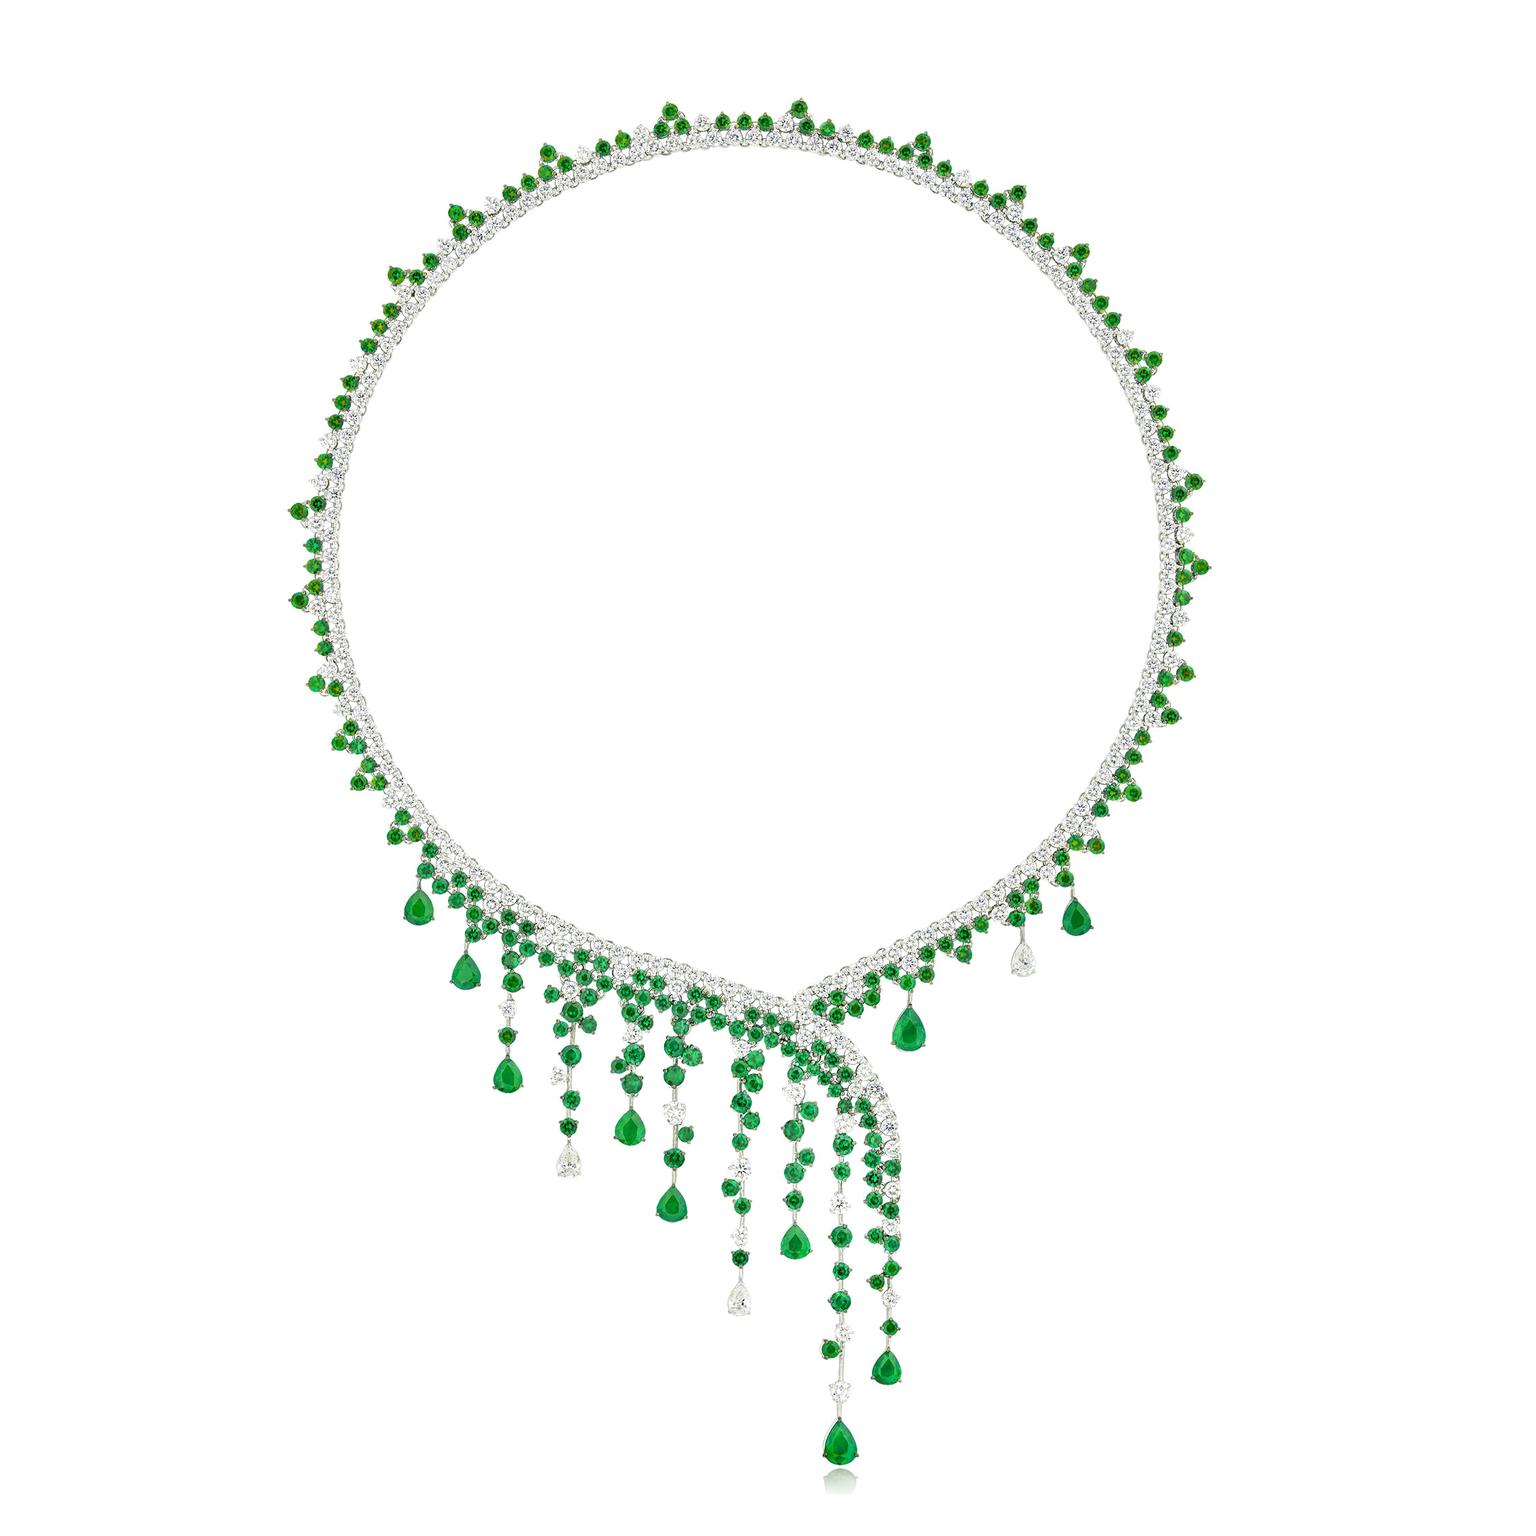 Stenzhorn Diana emerald and diamond necklace